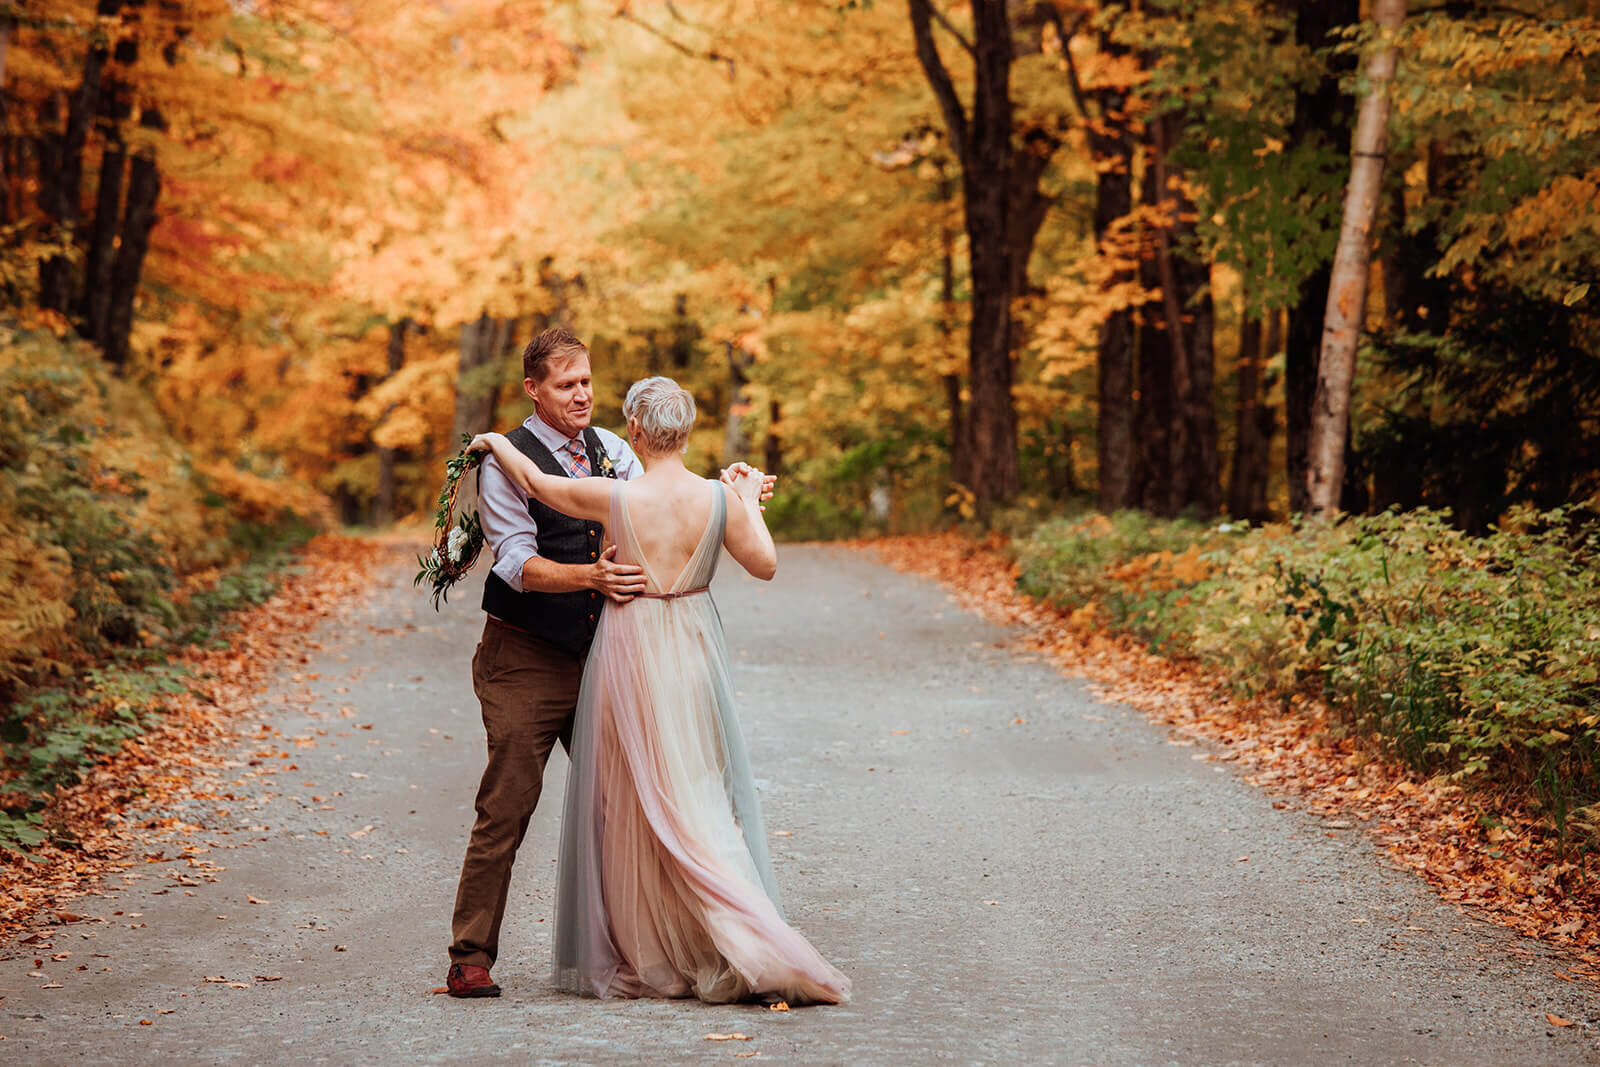  Couple dances through colorful tree tunnel after their elopement in Stowe, Vermont on Mt. Mansfield 